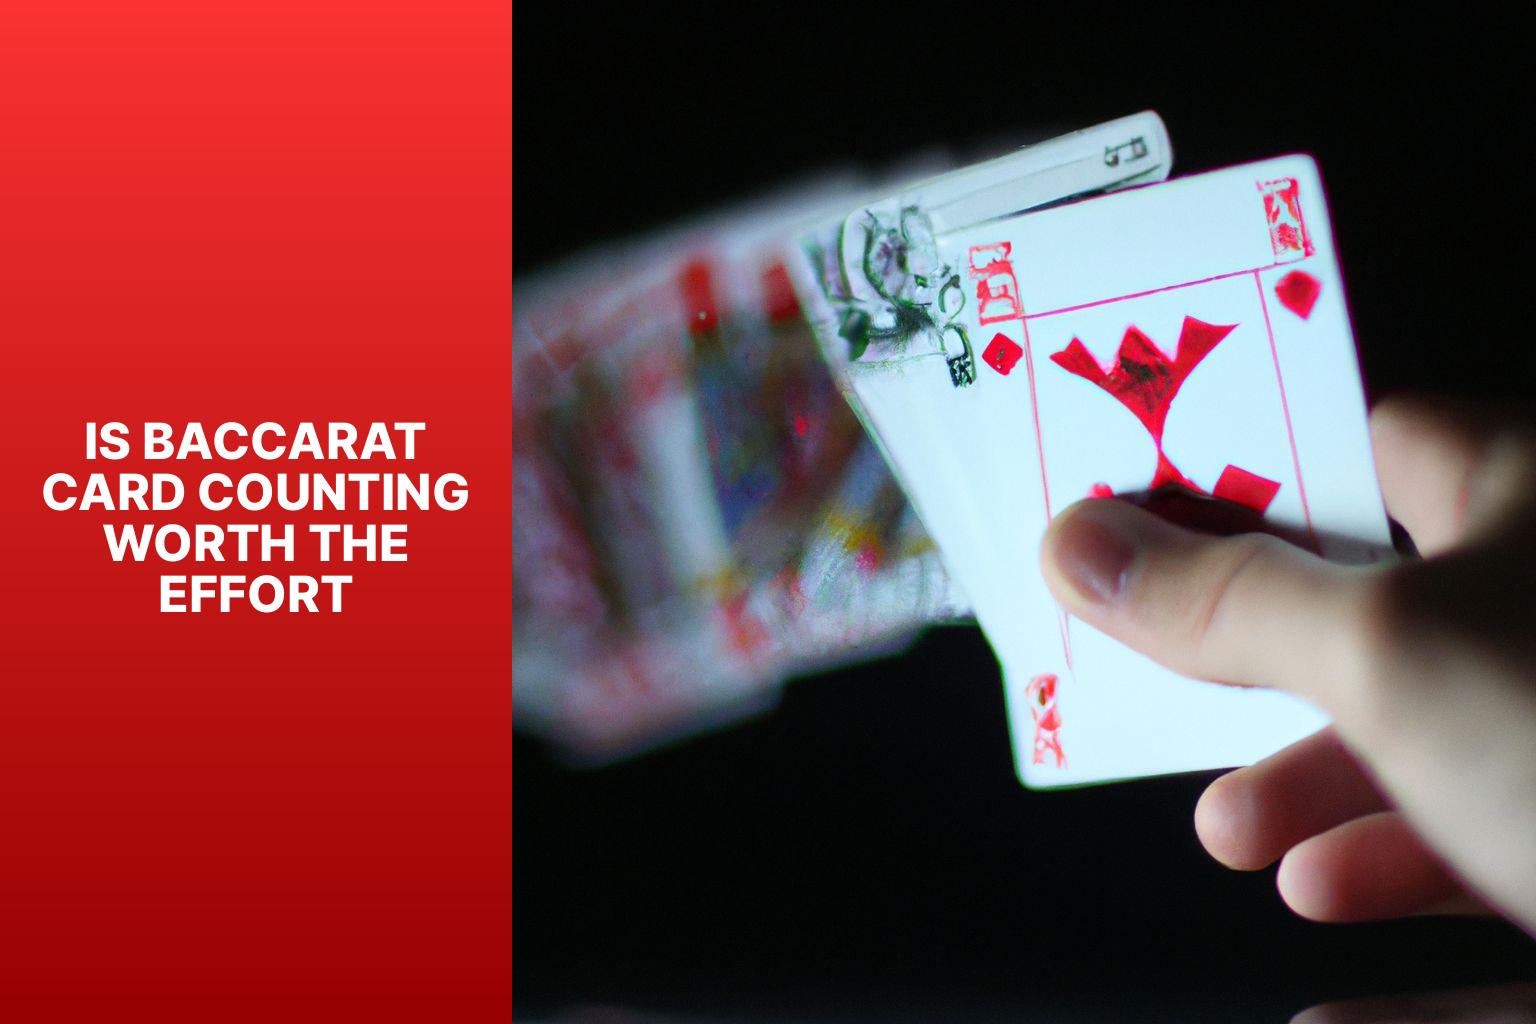 Is Baccarat Card Counting Worth the Effort